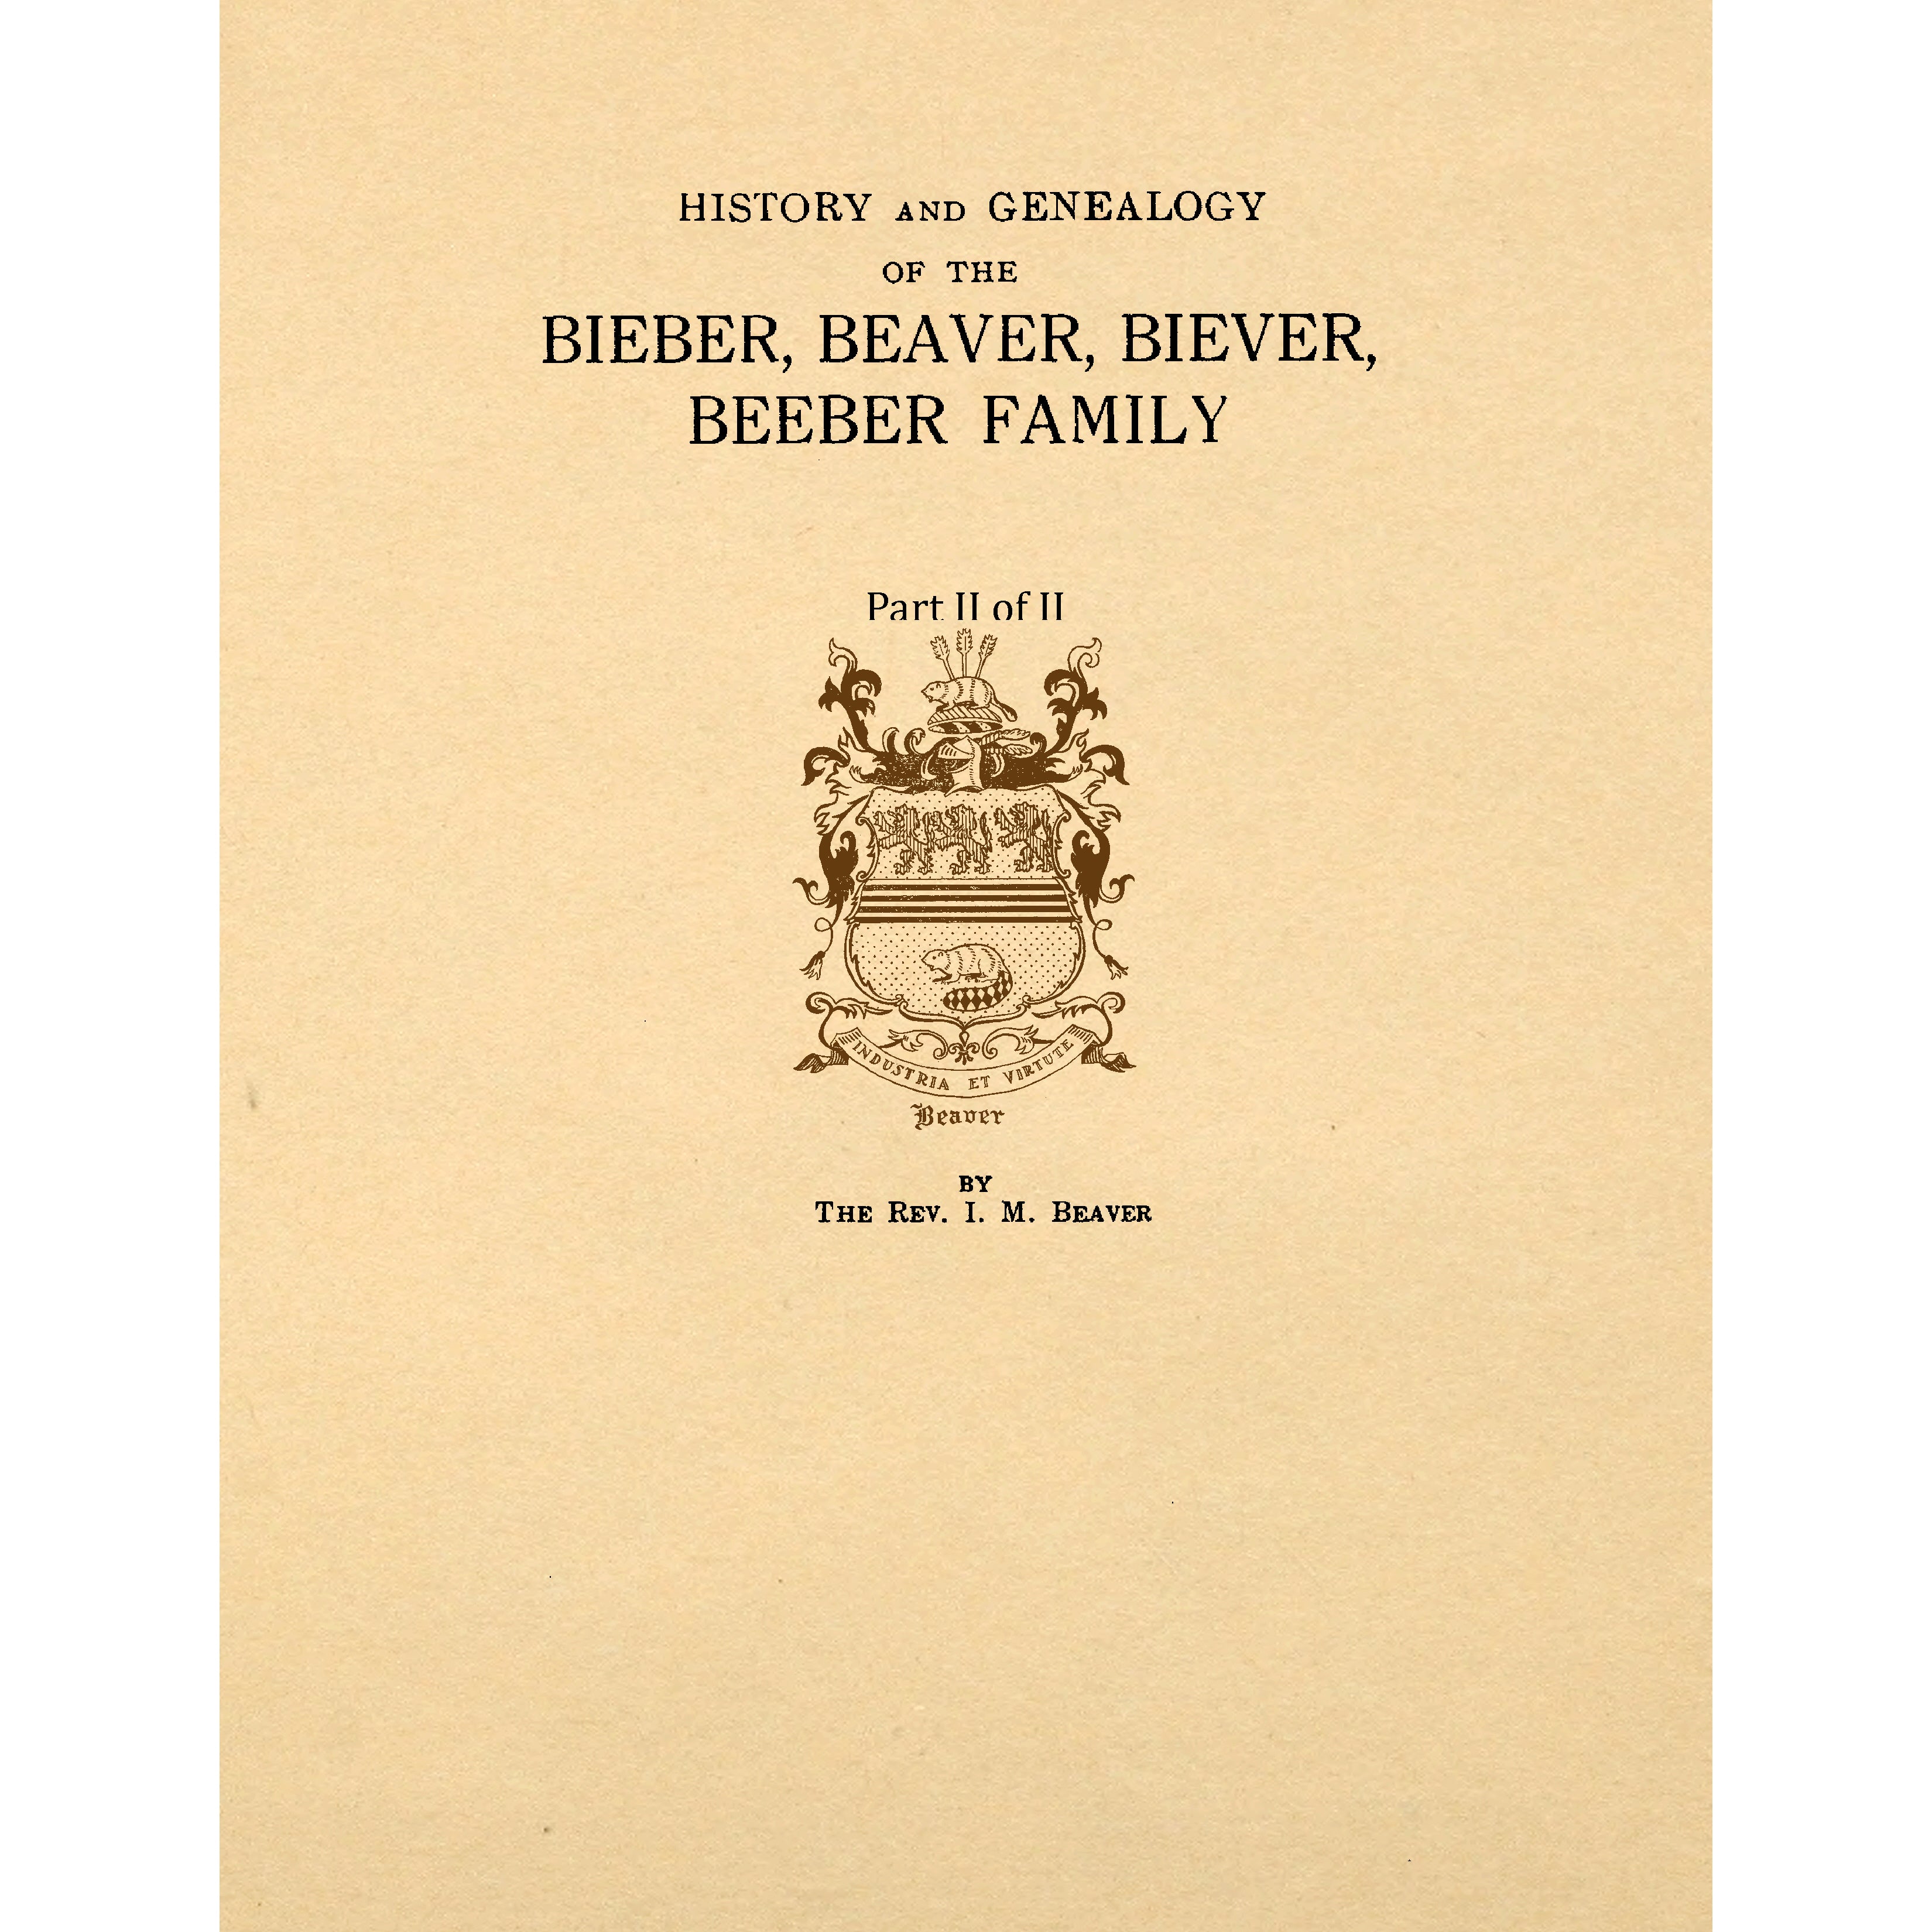 History And Genealogy Of The Bieber, Beaver, Biever, Beeber Family